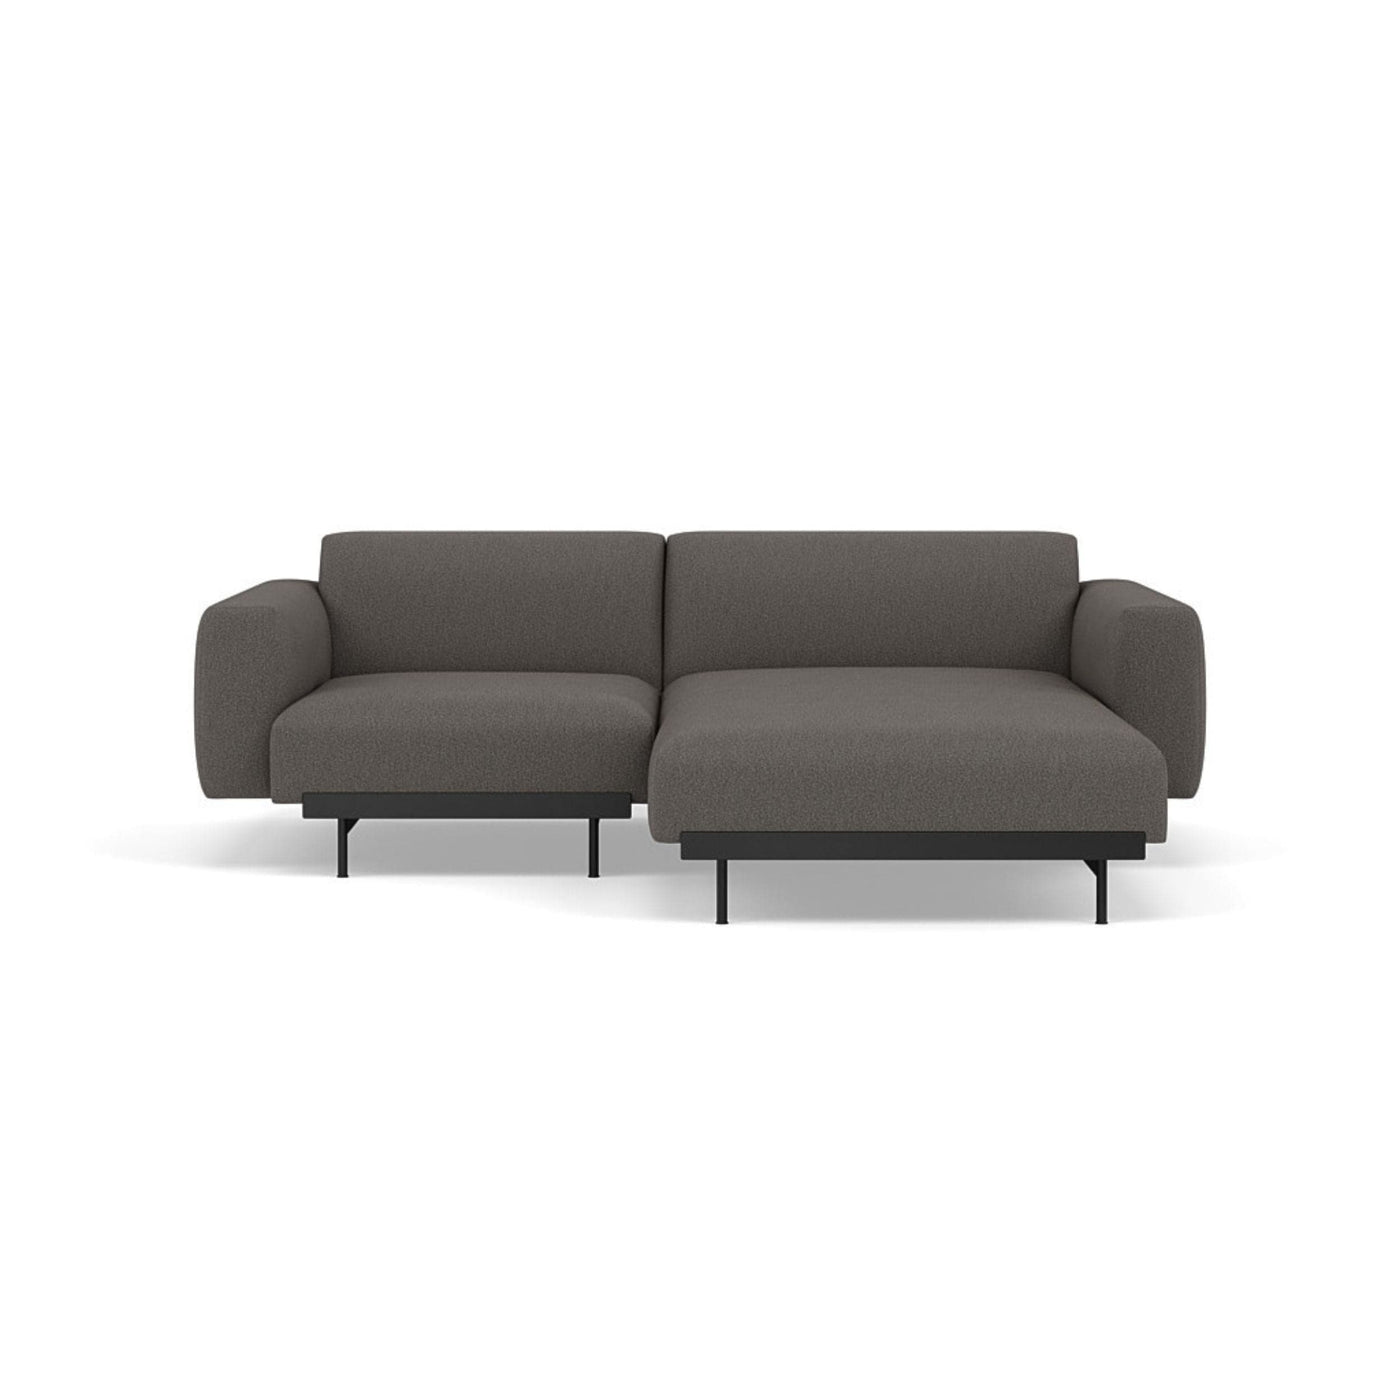 Muuto In Situ Modular 2 Seater Sofa, configuration 4. Made to order from someday designs #colour_clay-9